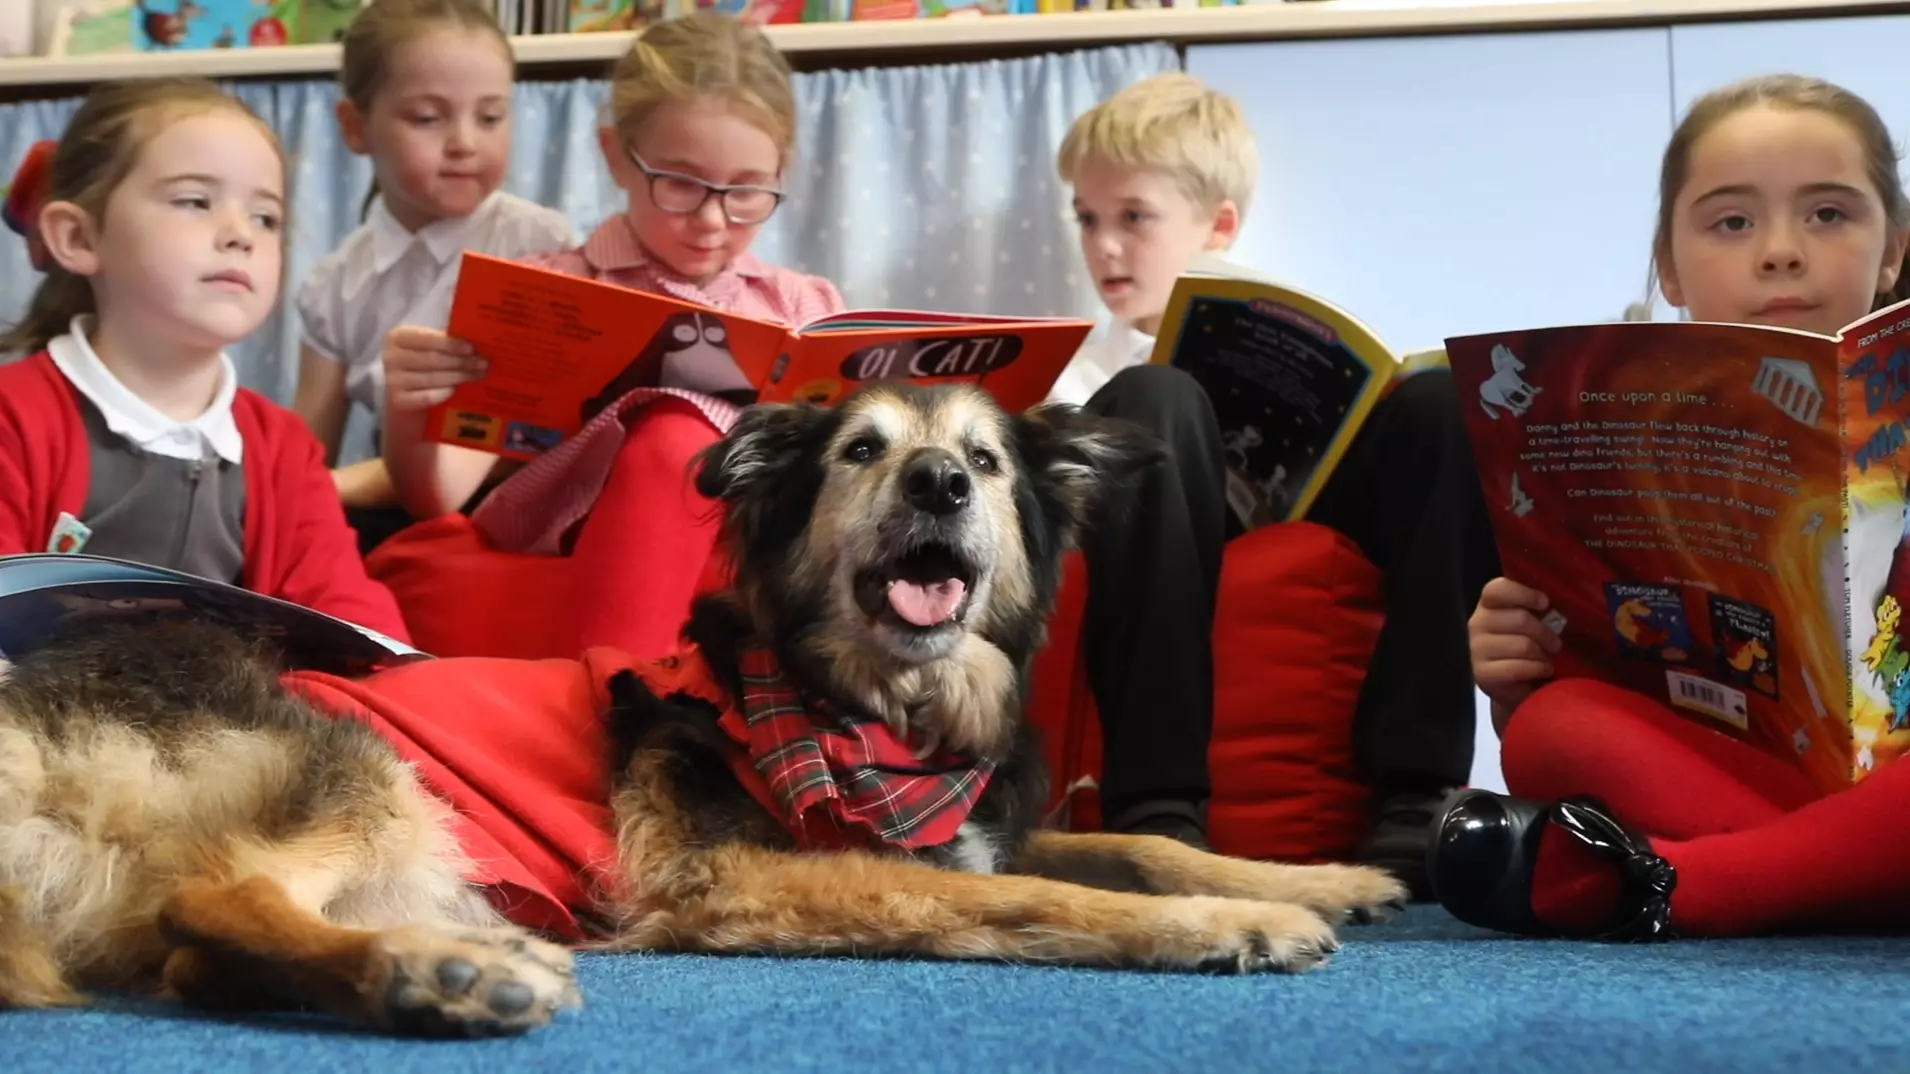 Adorable Dog Helps School Children Learn To Read And Has His Own Uniform